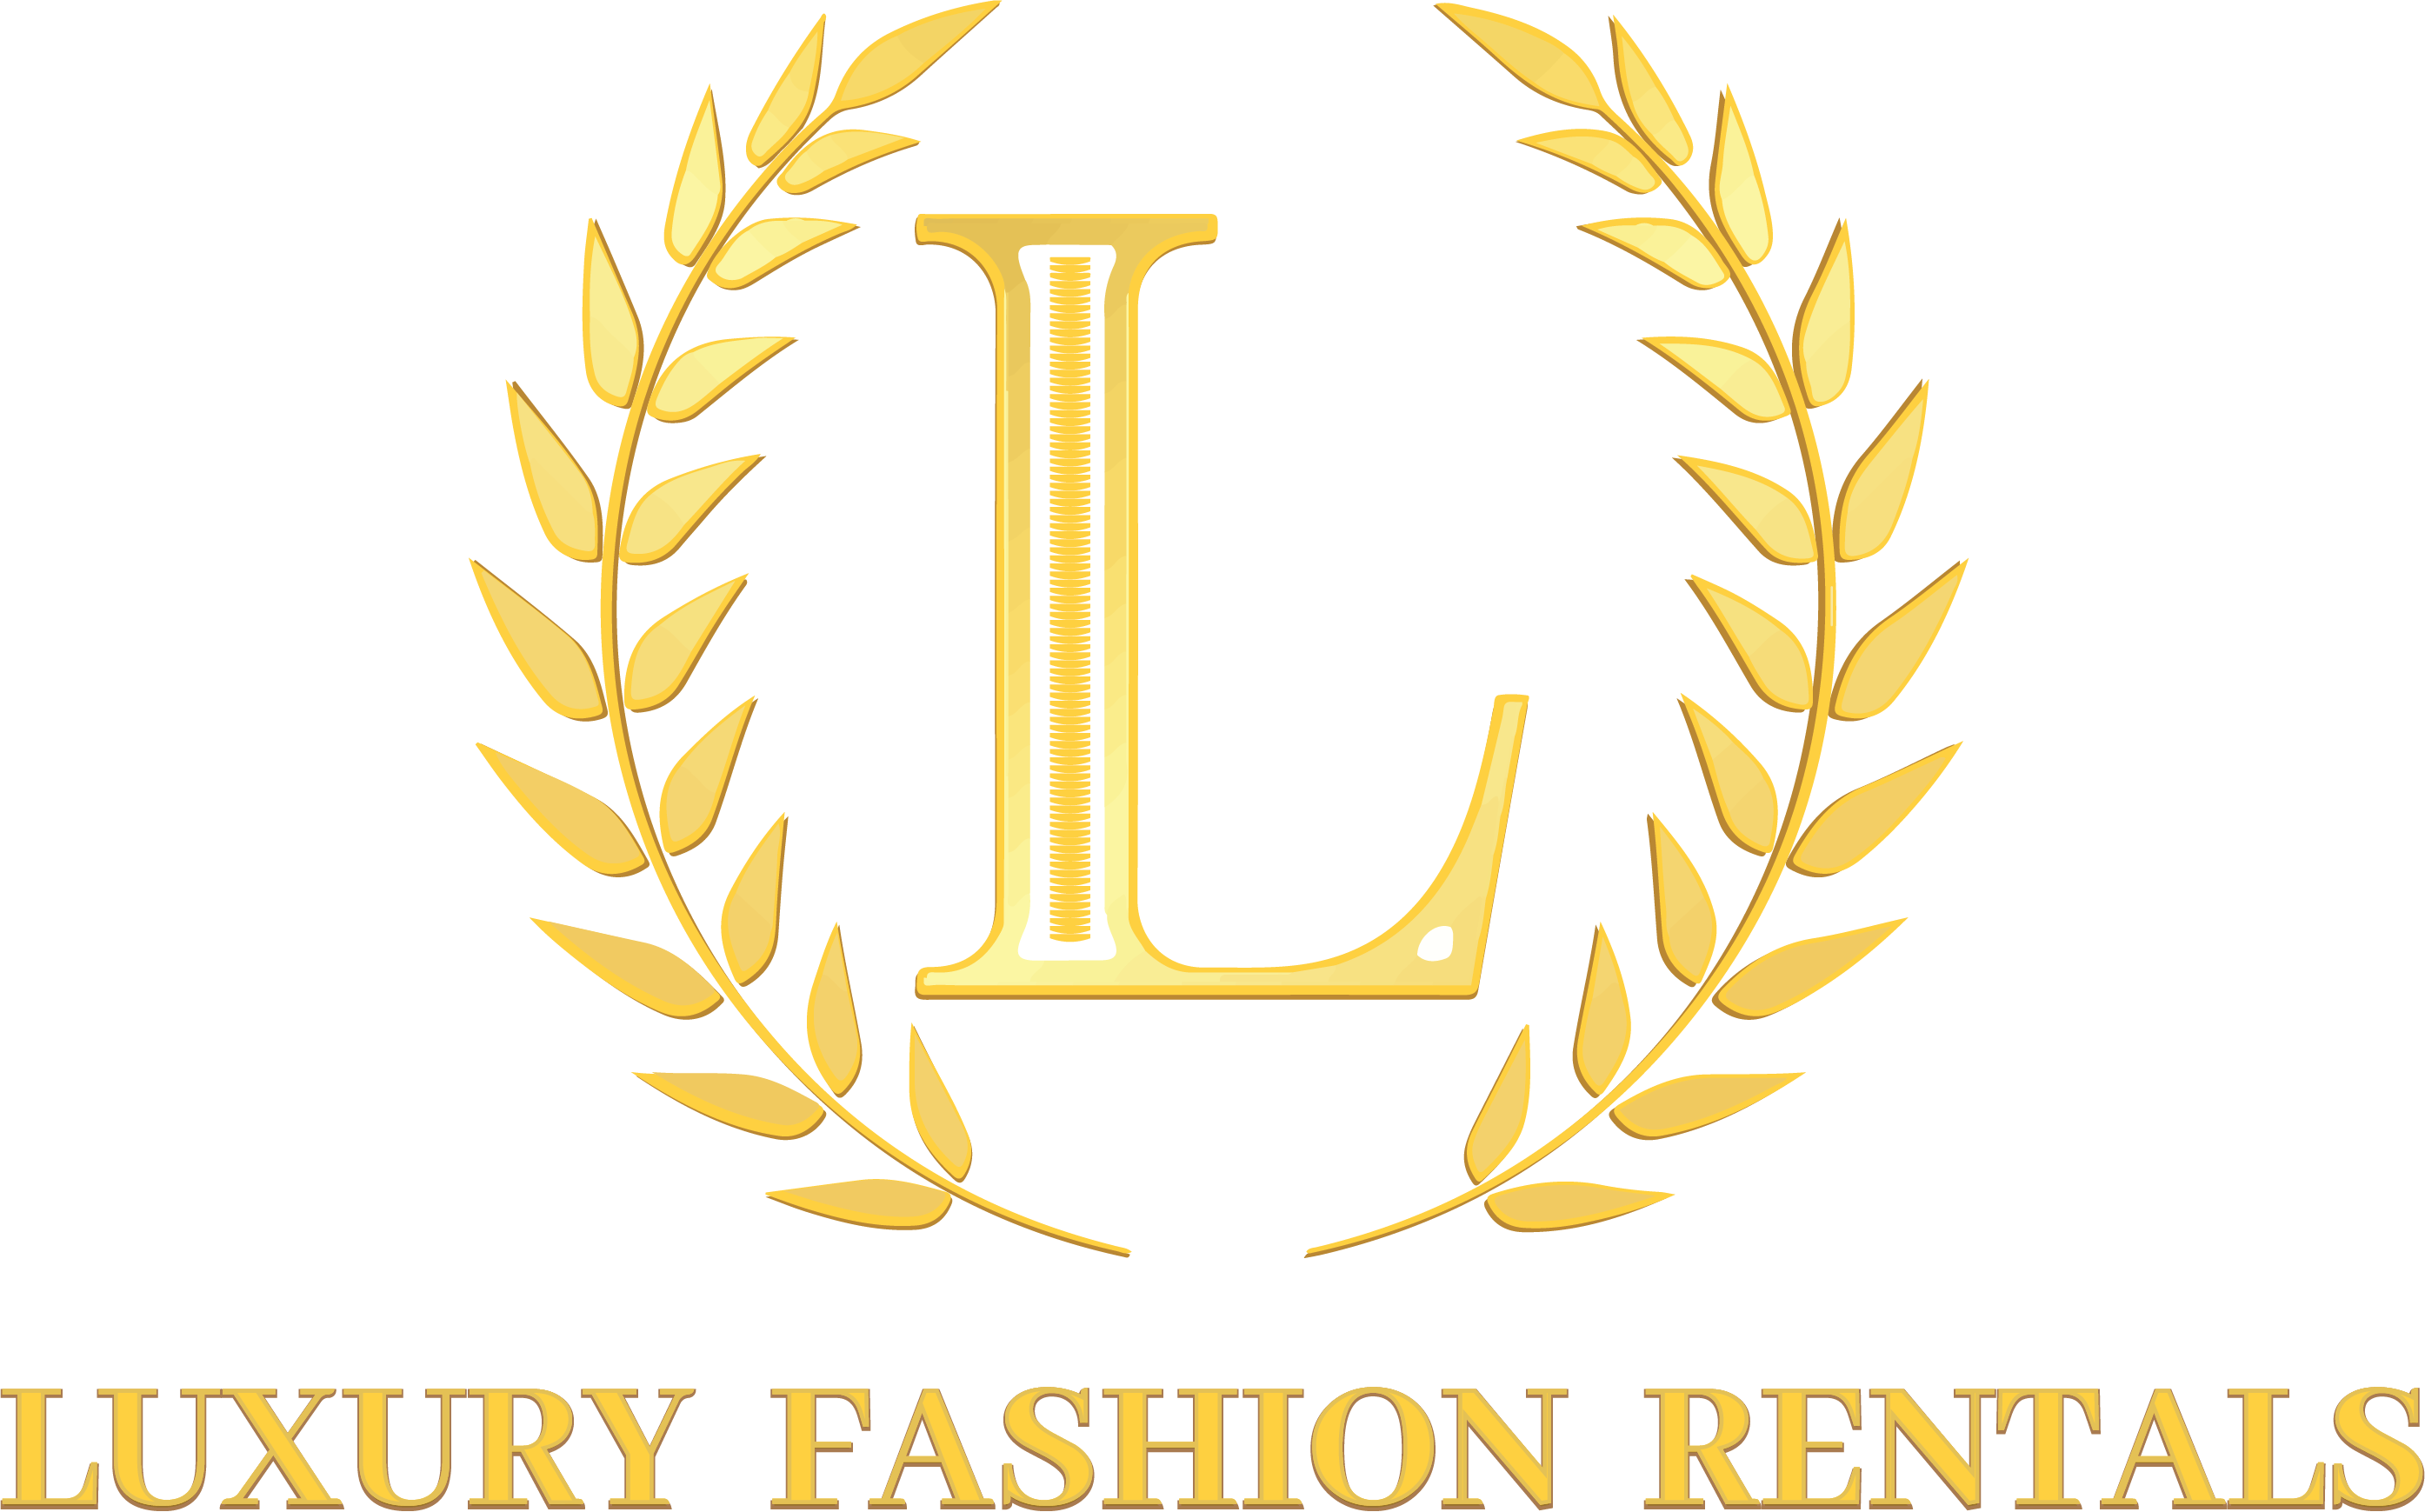 Luxury Fashion Rentals, Monday, February 3, 2020, Press release picture